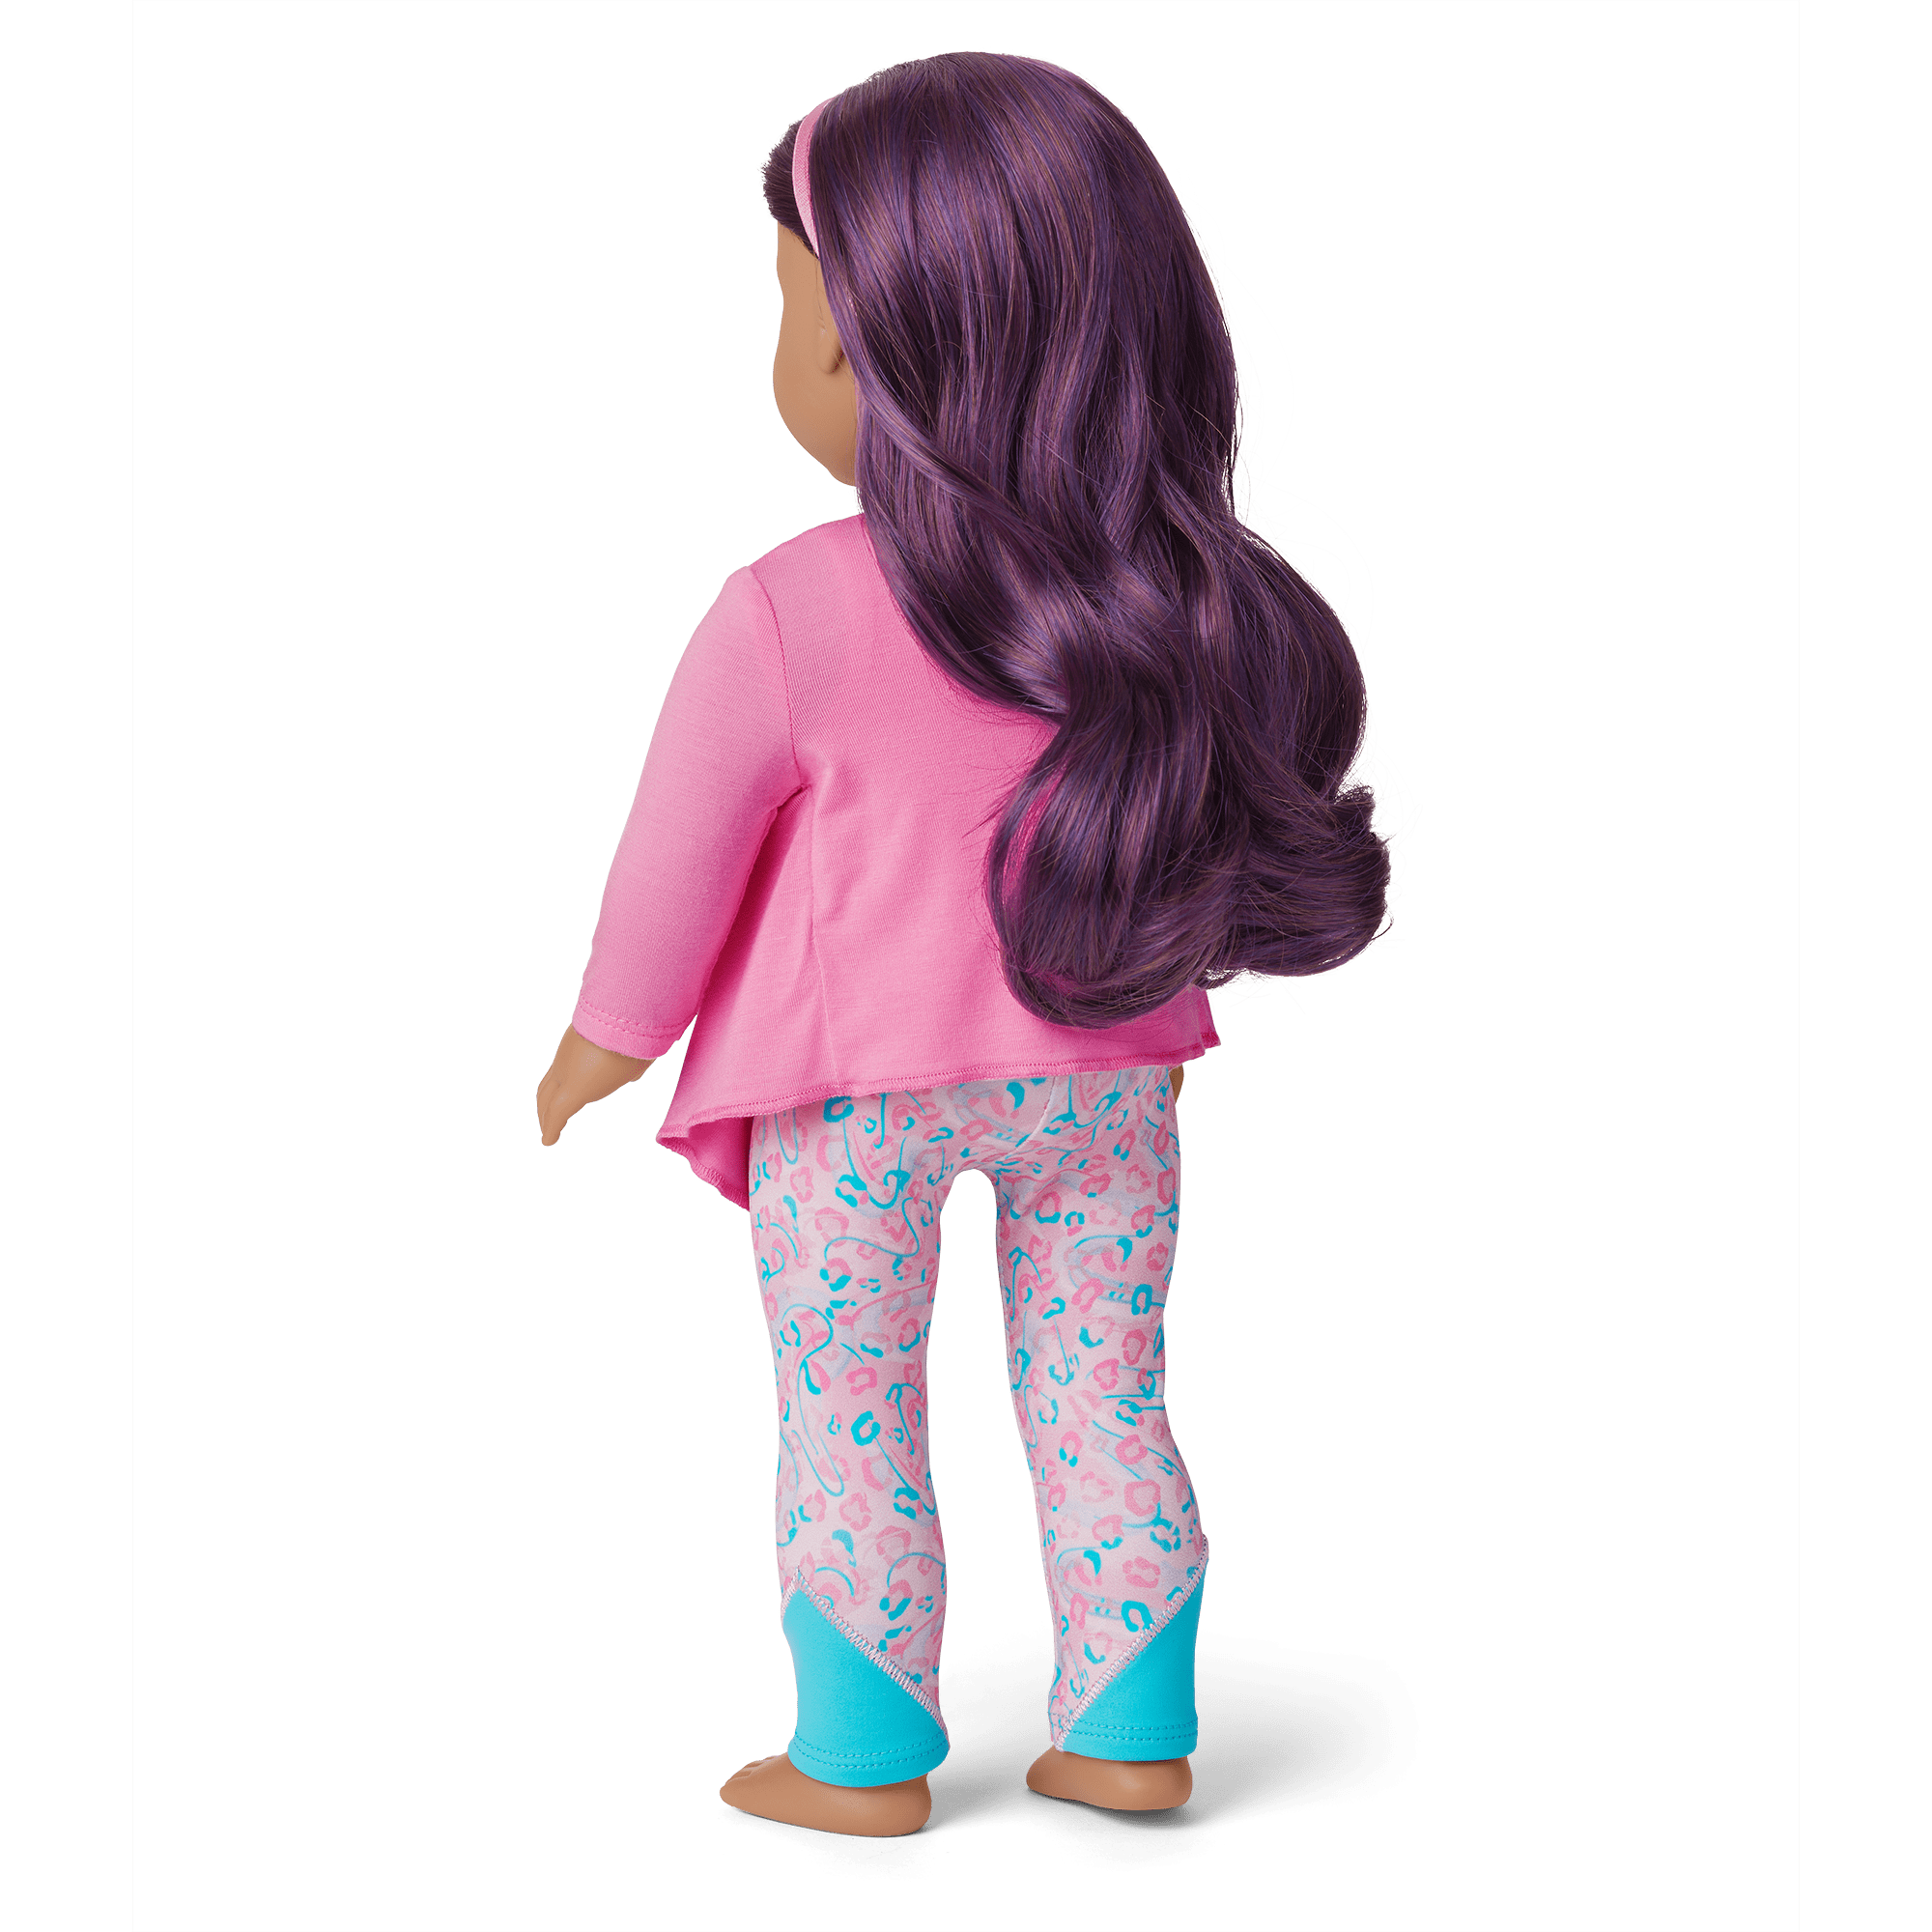 Yog-Ahh Outfit for 18-inch Dolls | American Girl